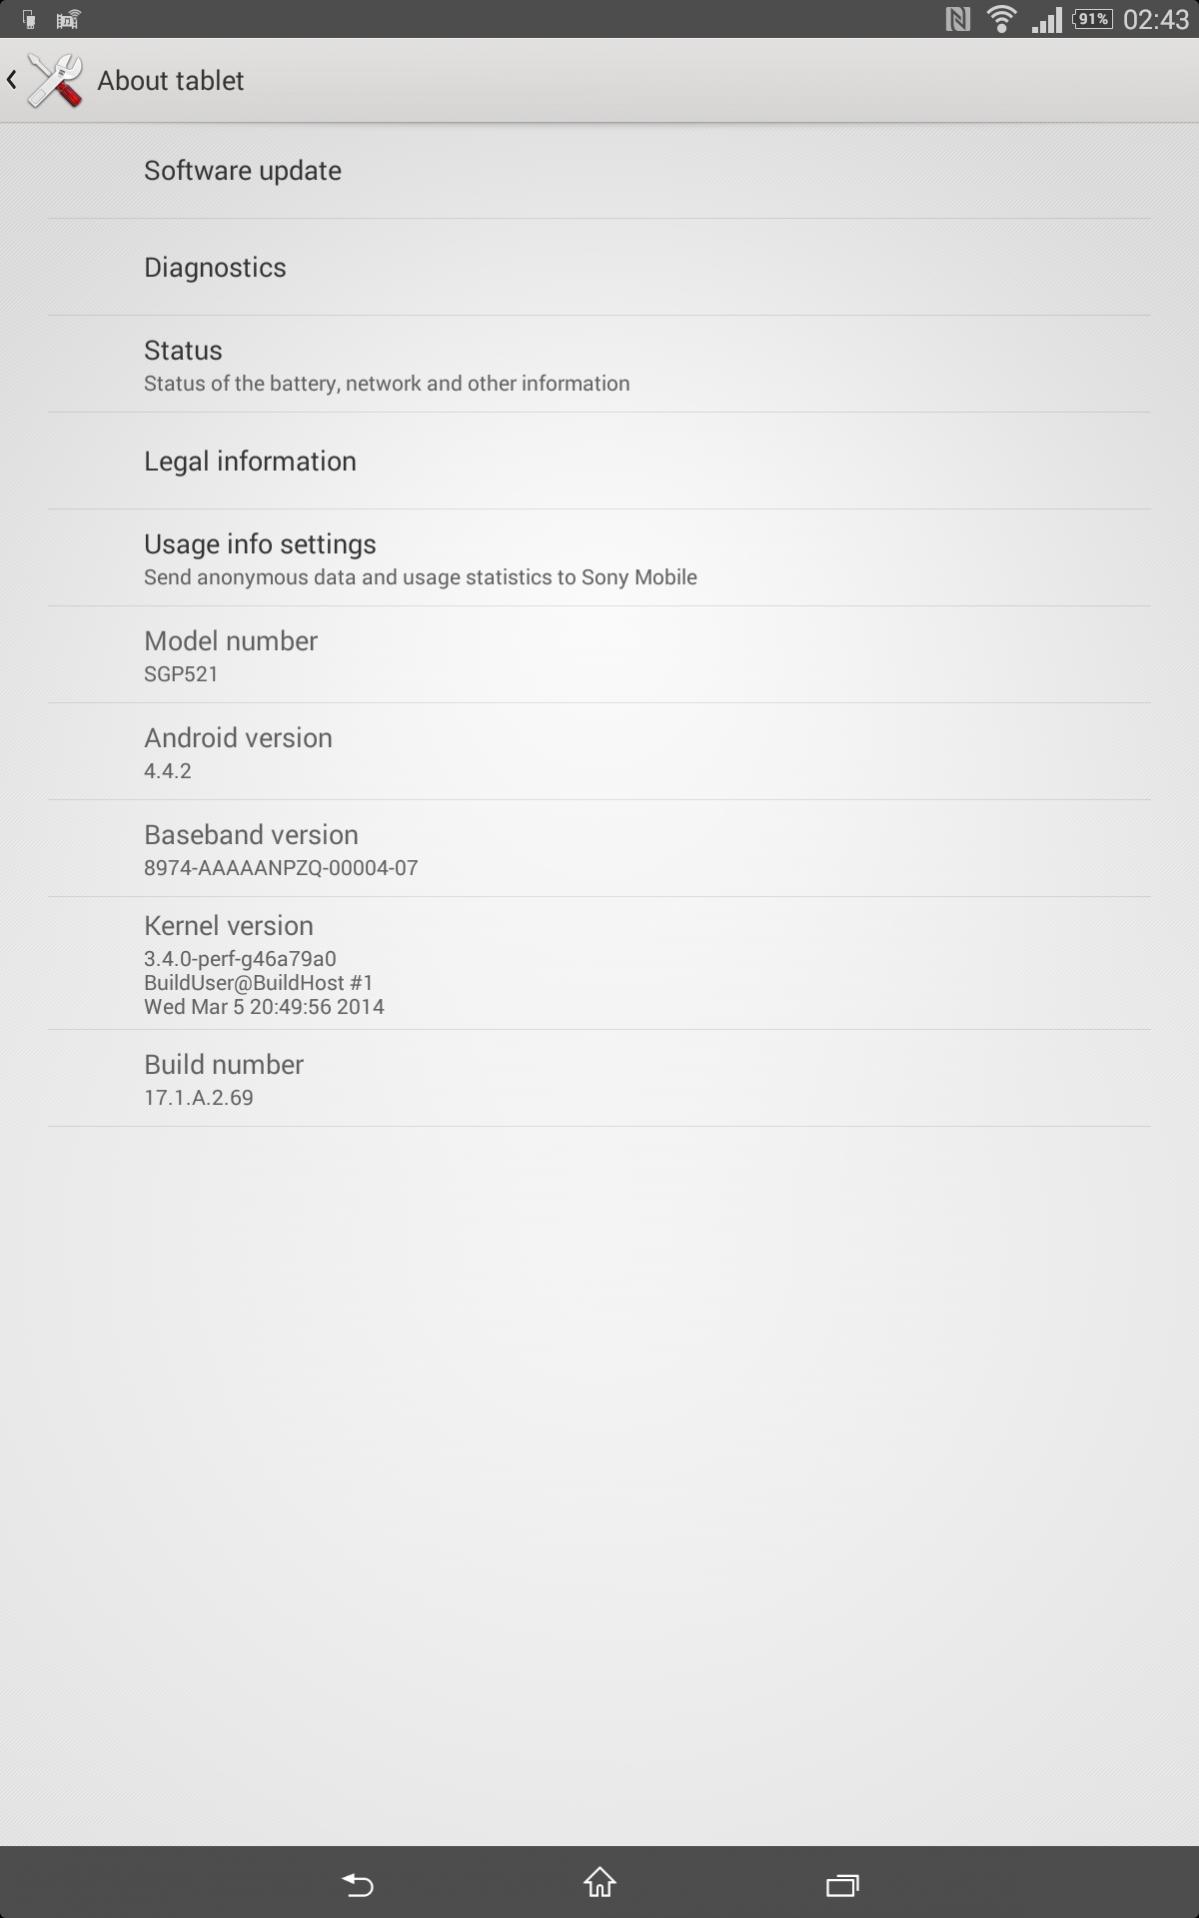 17.1.A.2.69 firmware Xperia Z2 Tablet